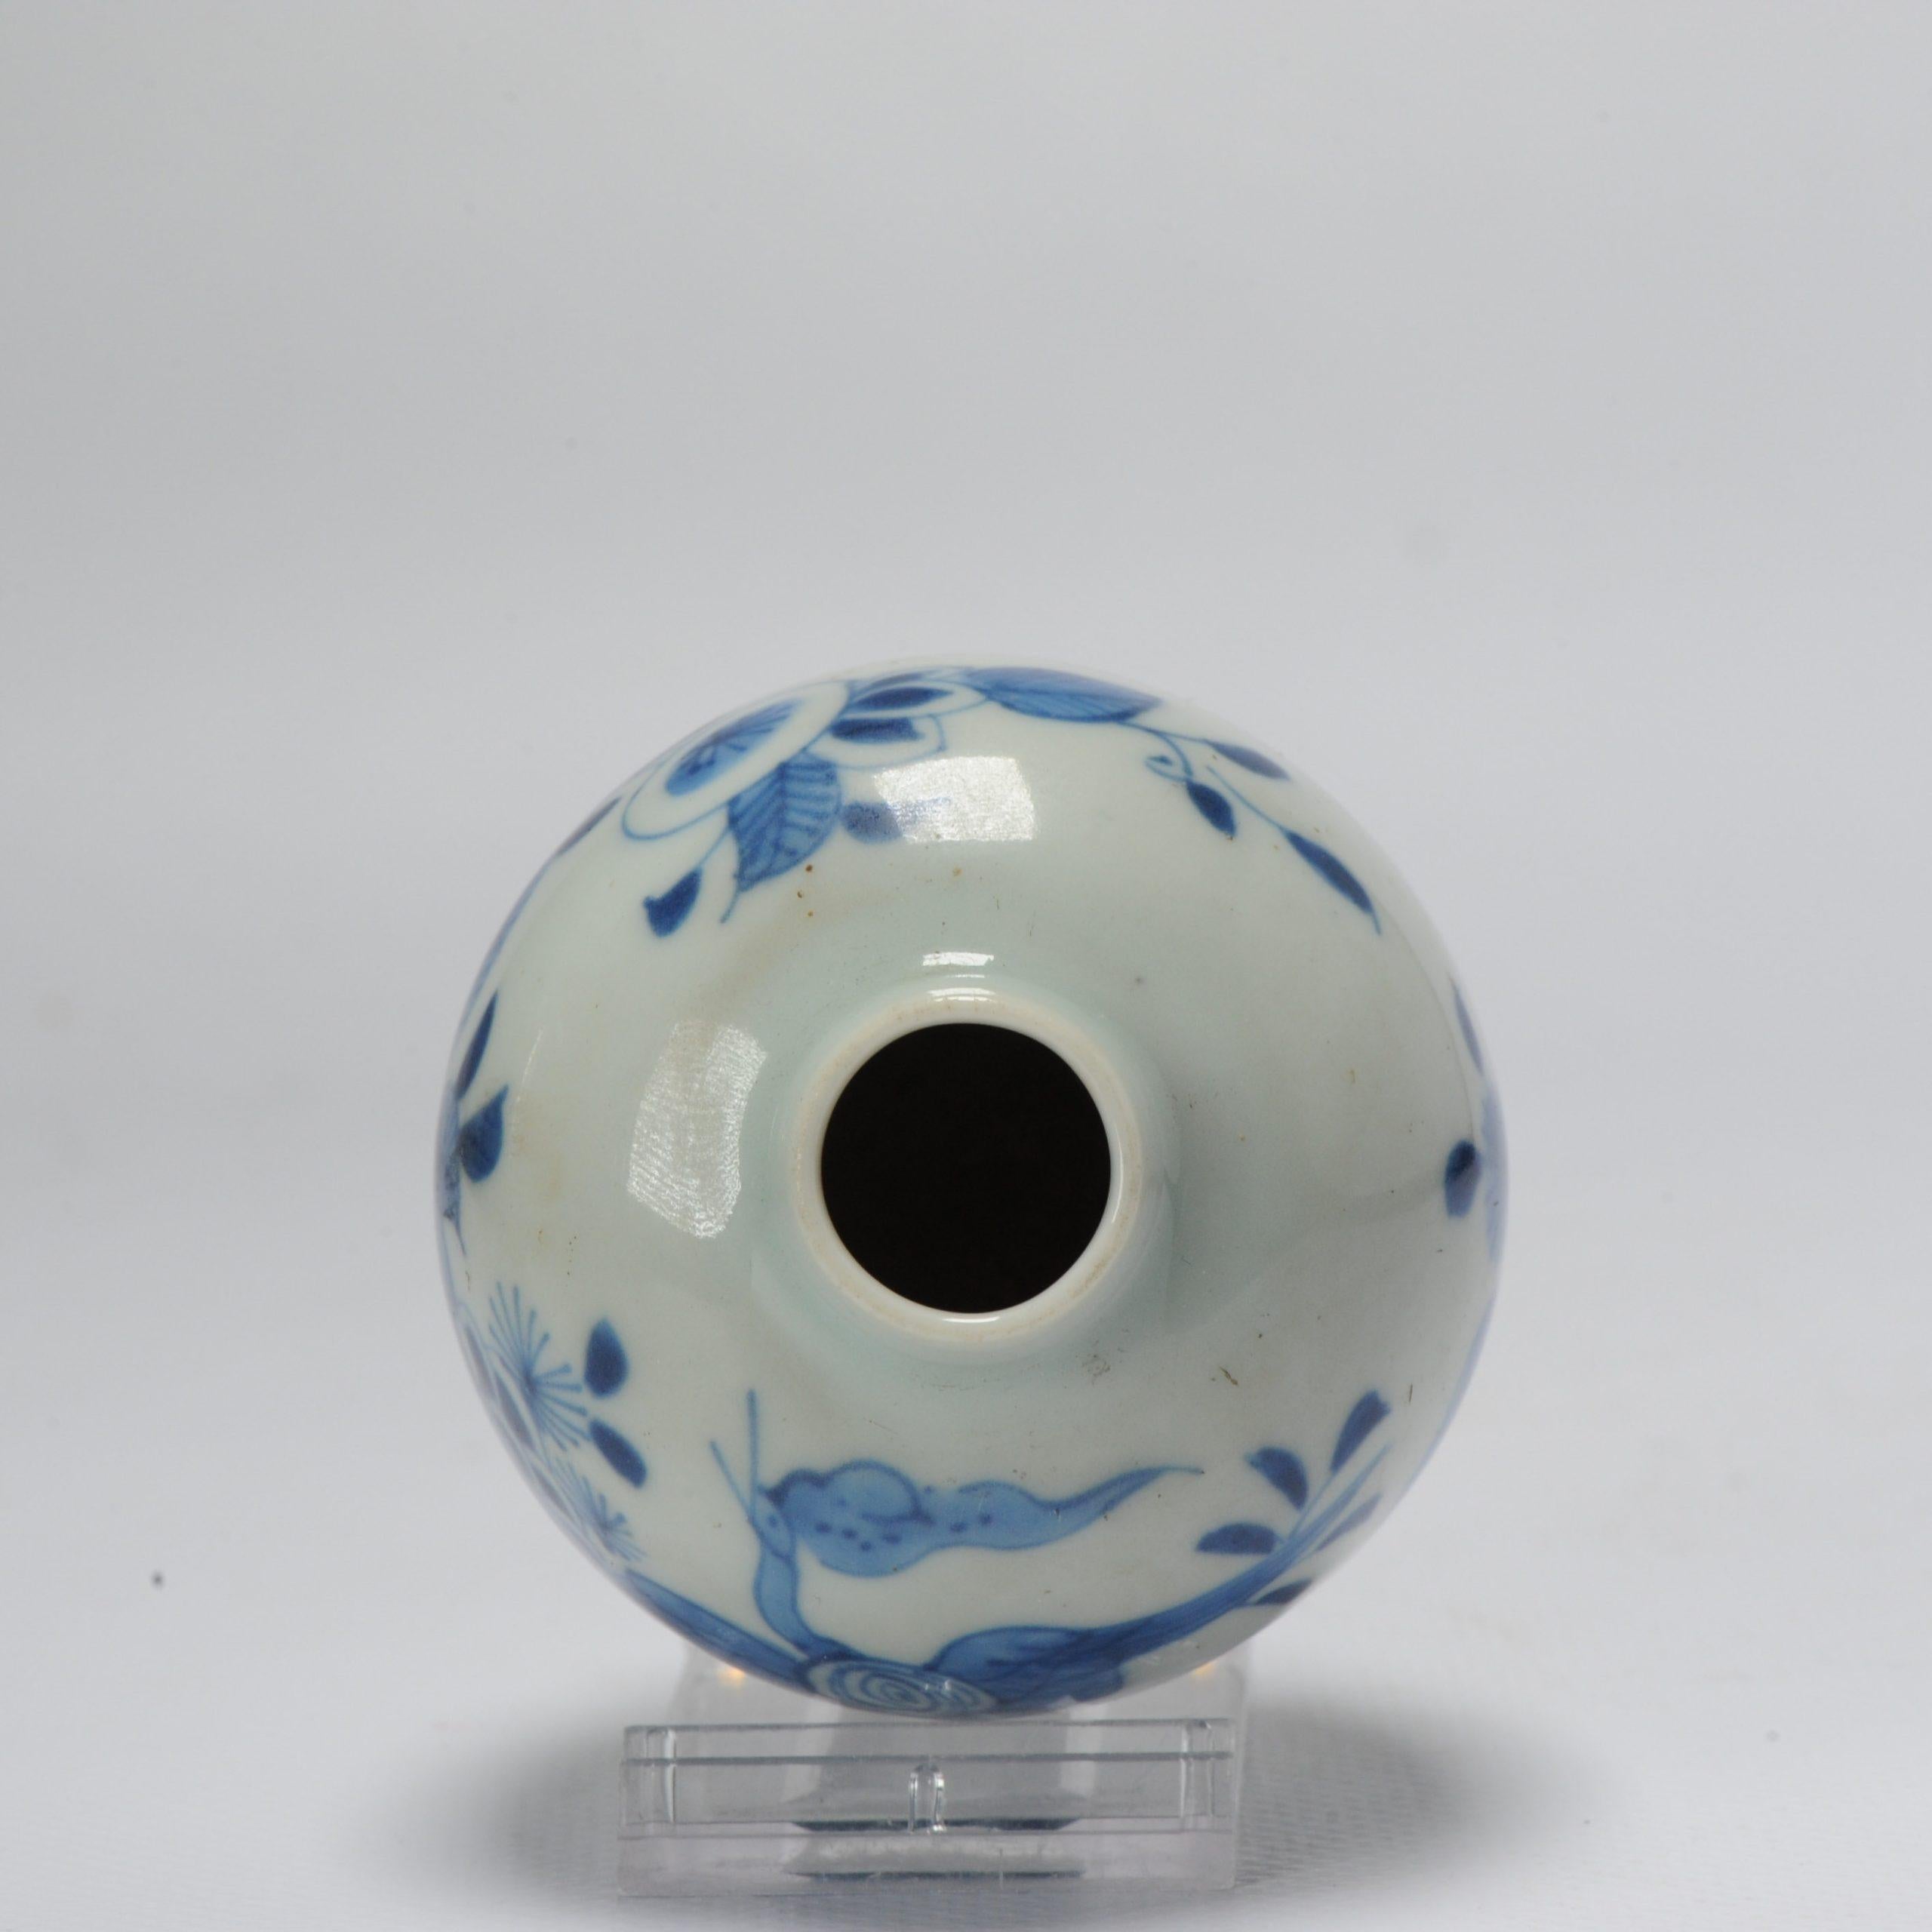 Very nice and delicate small vase or water dropper from the edo period. Flowers and Paradise bird scene.

Additional information:
Material: Porcelain & Pottery
Japanese Style: Arita
Color: Blue & White
Region of Origin: Japan
Period: 18th century,